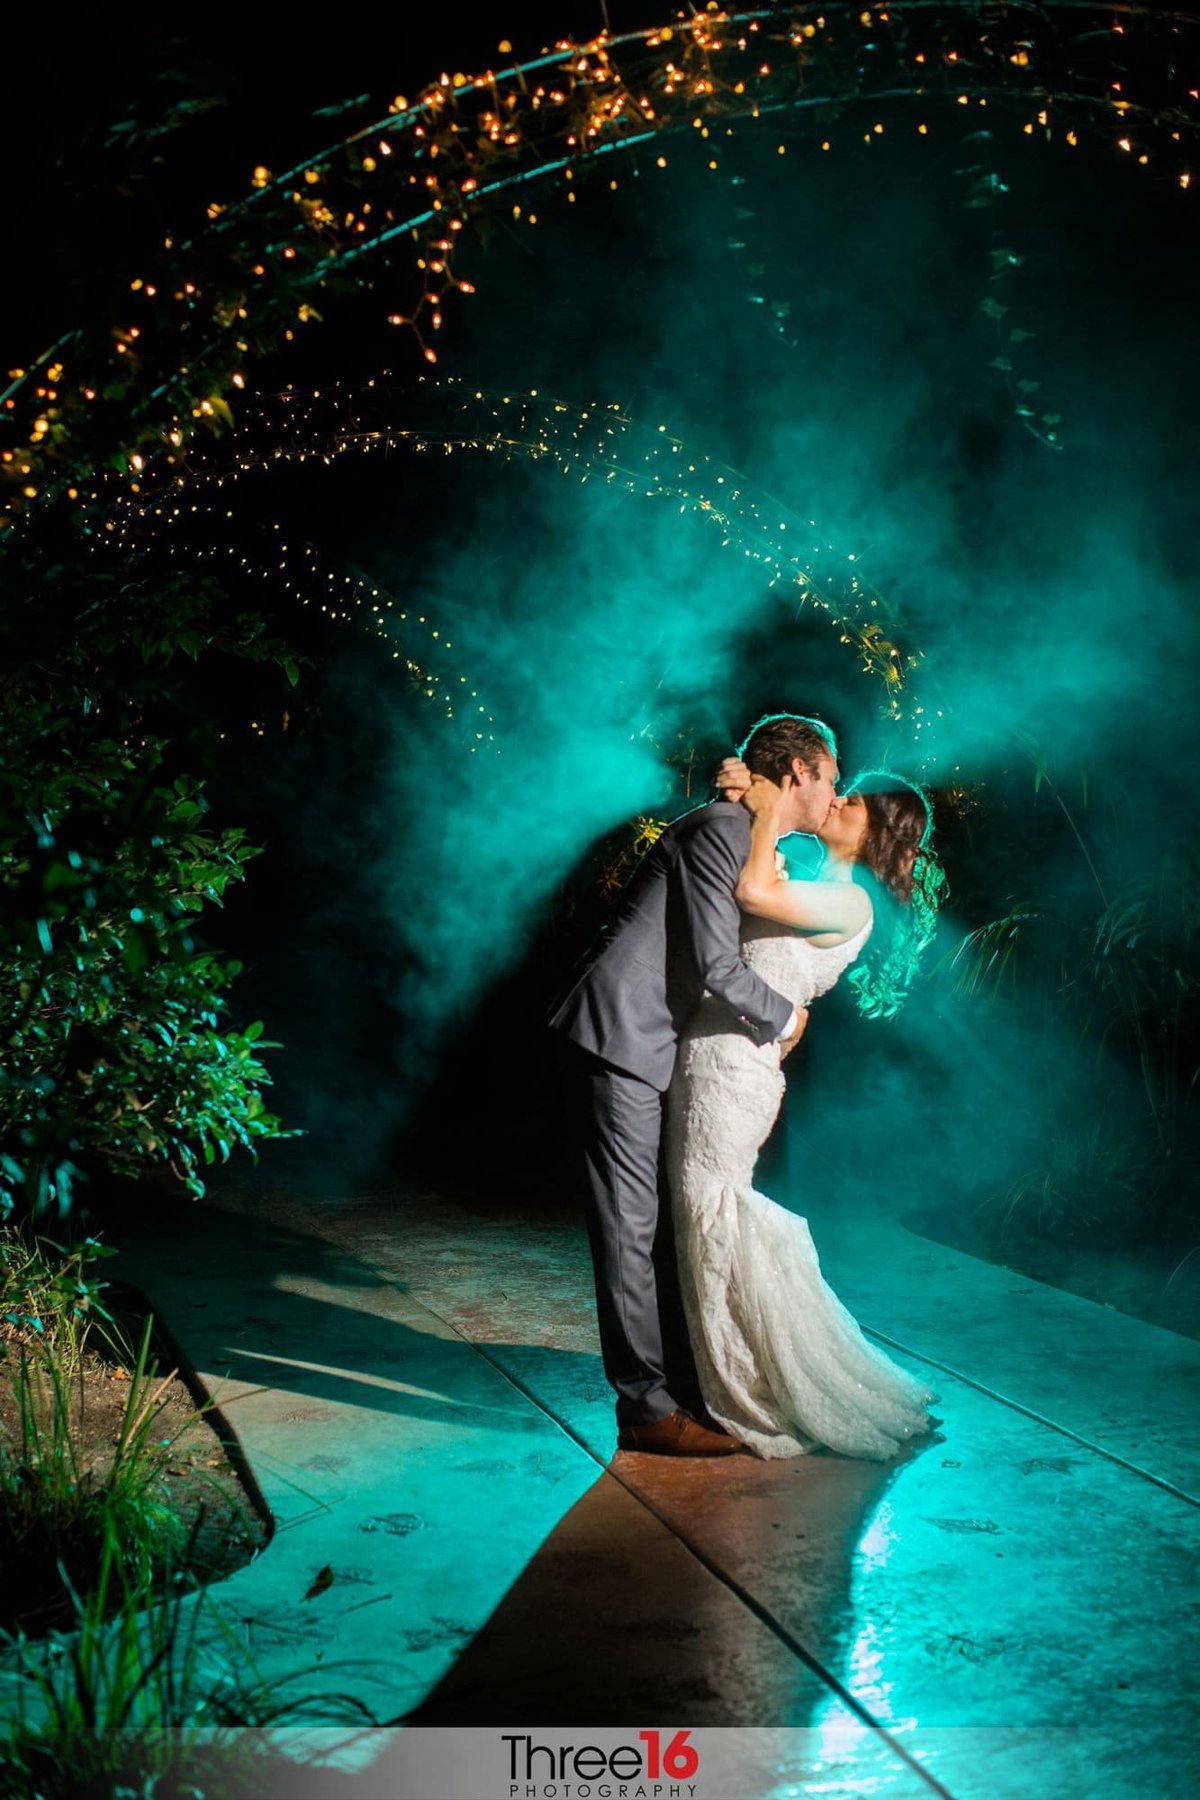 Beautiful night shot of Bride and Groom kissing with blue mist in the background